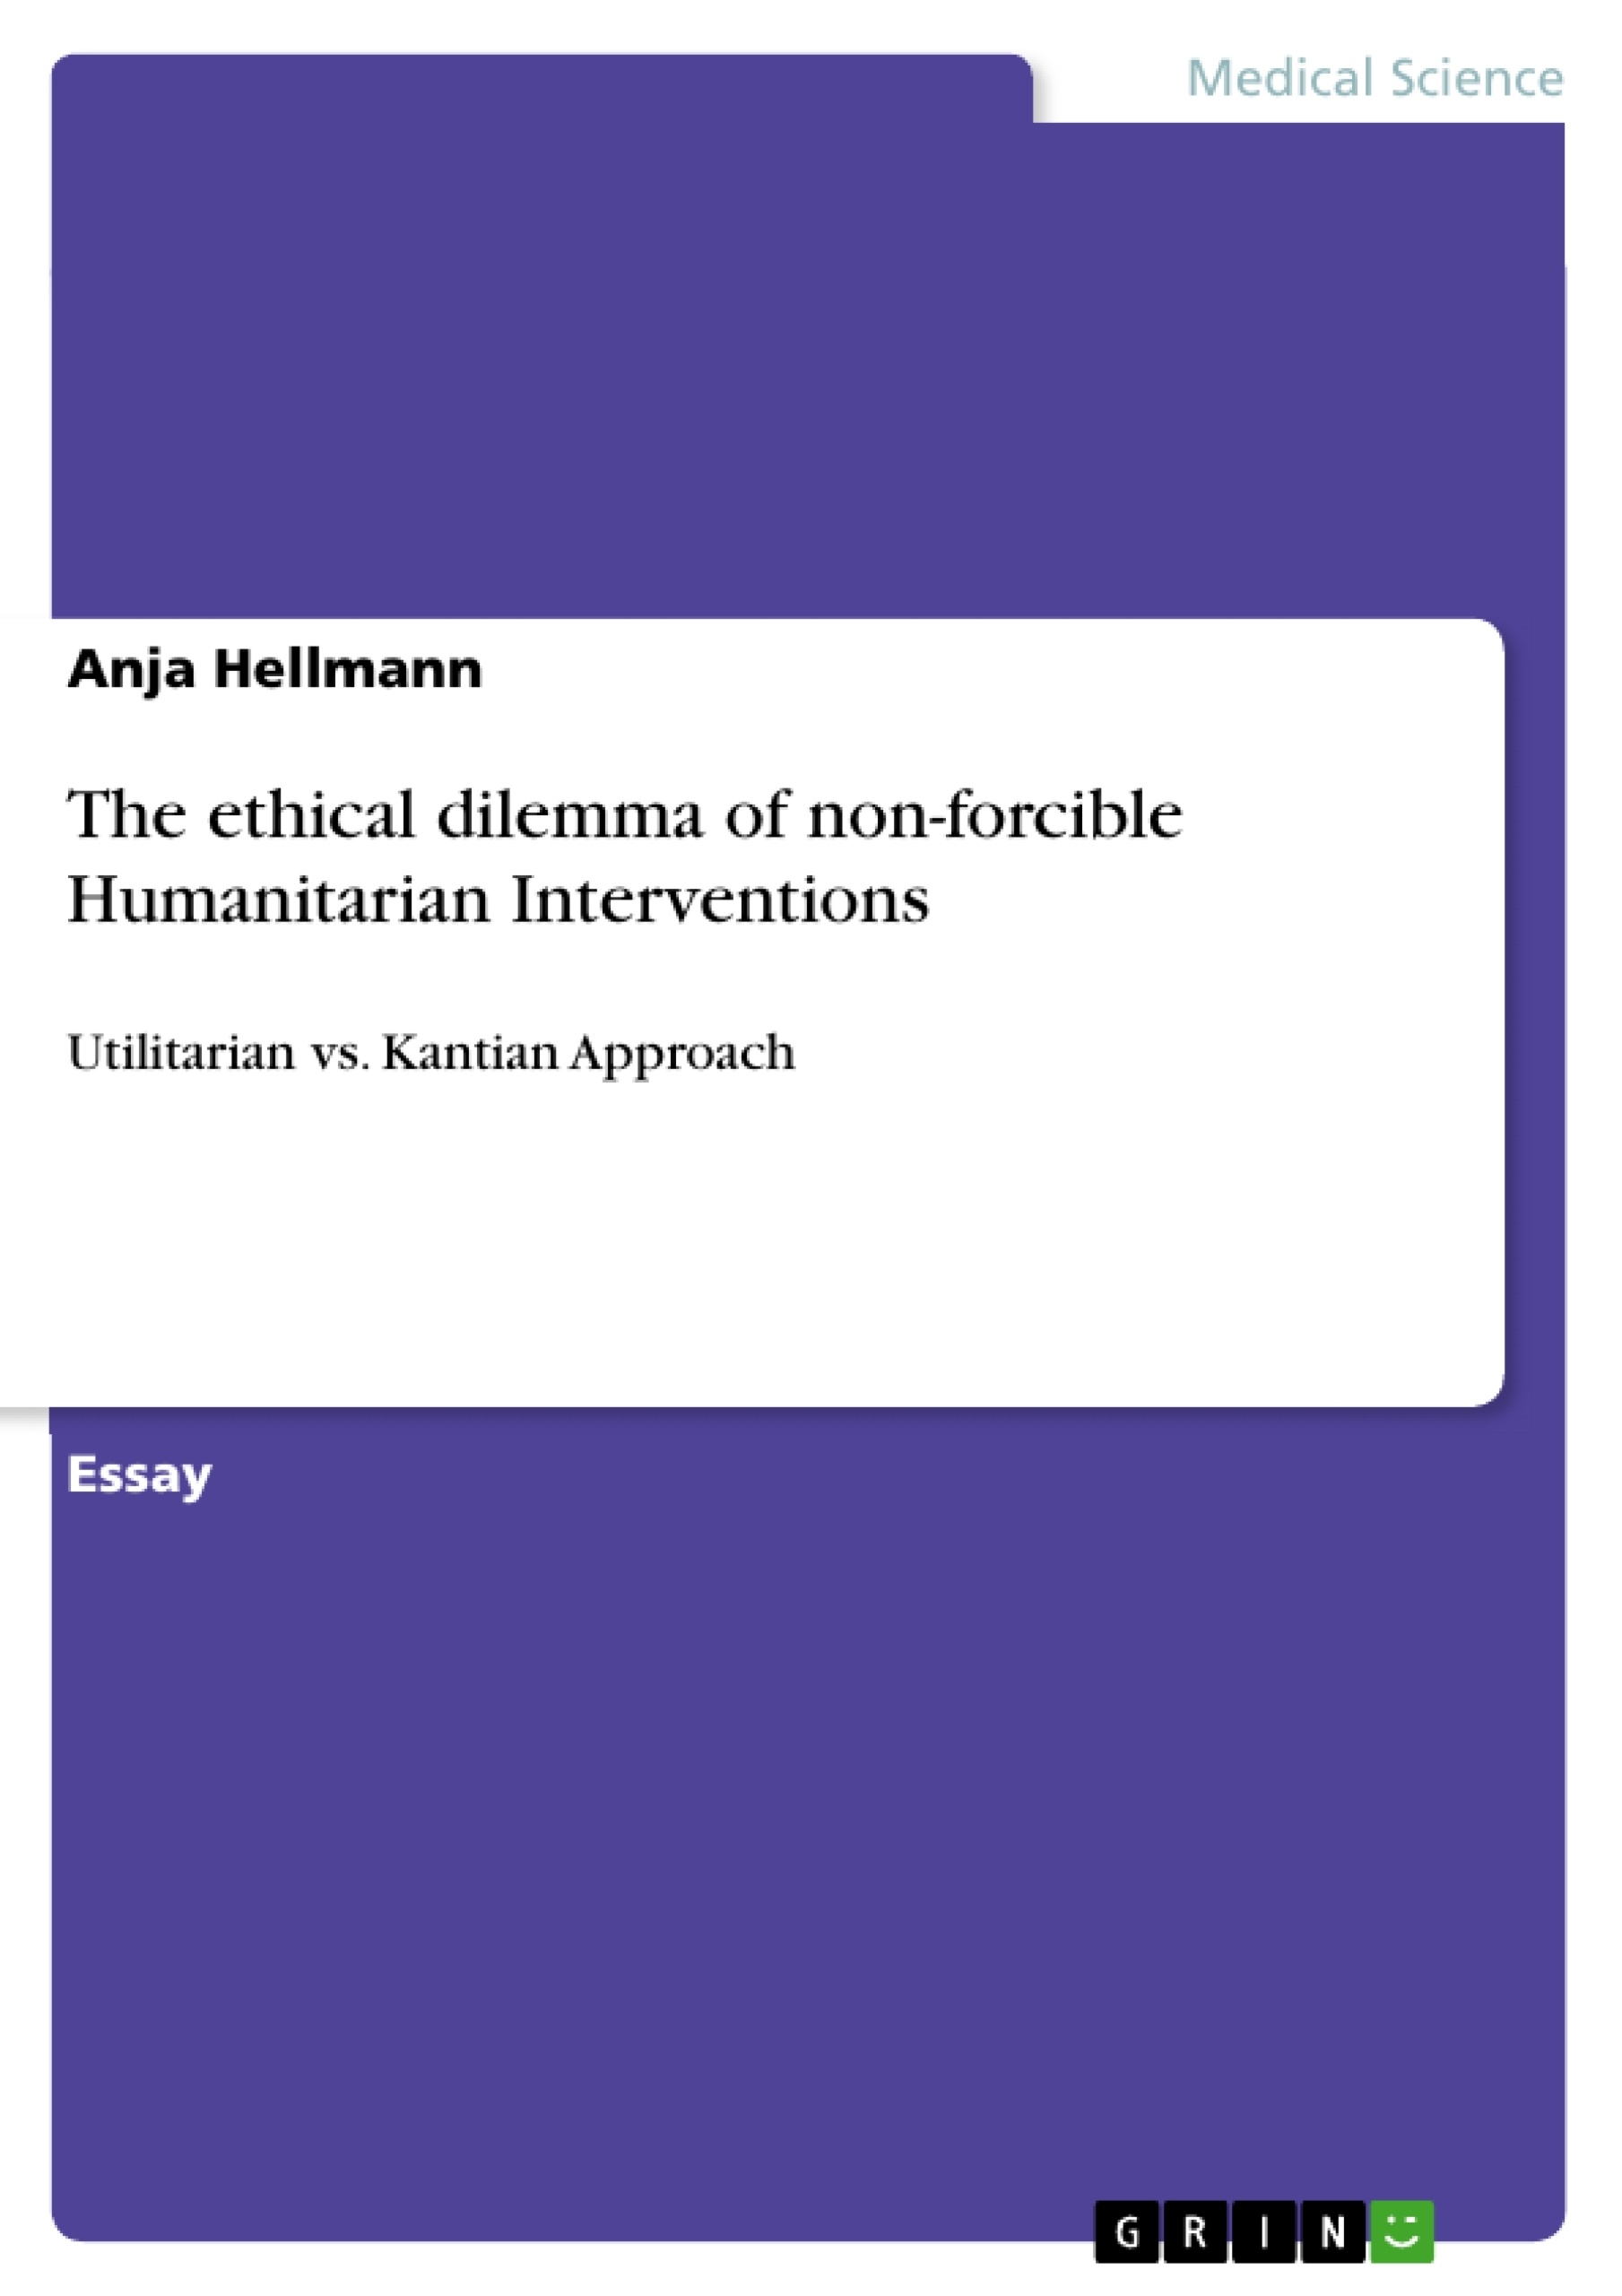 Titel: The ethical dilemma of non-forcible Humanitarian Interventions  